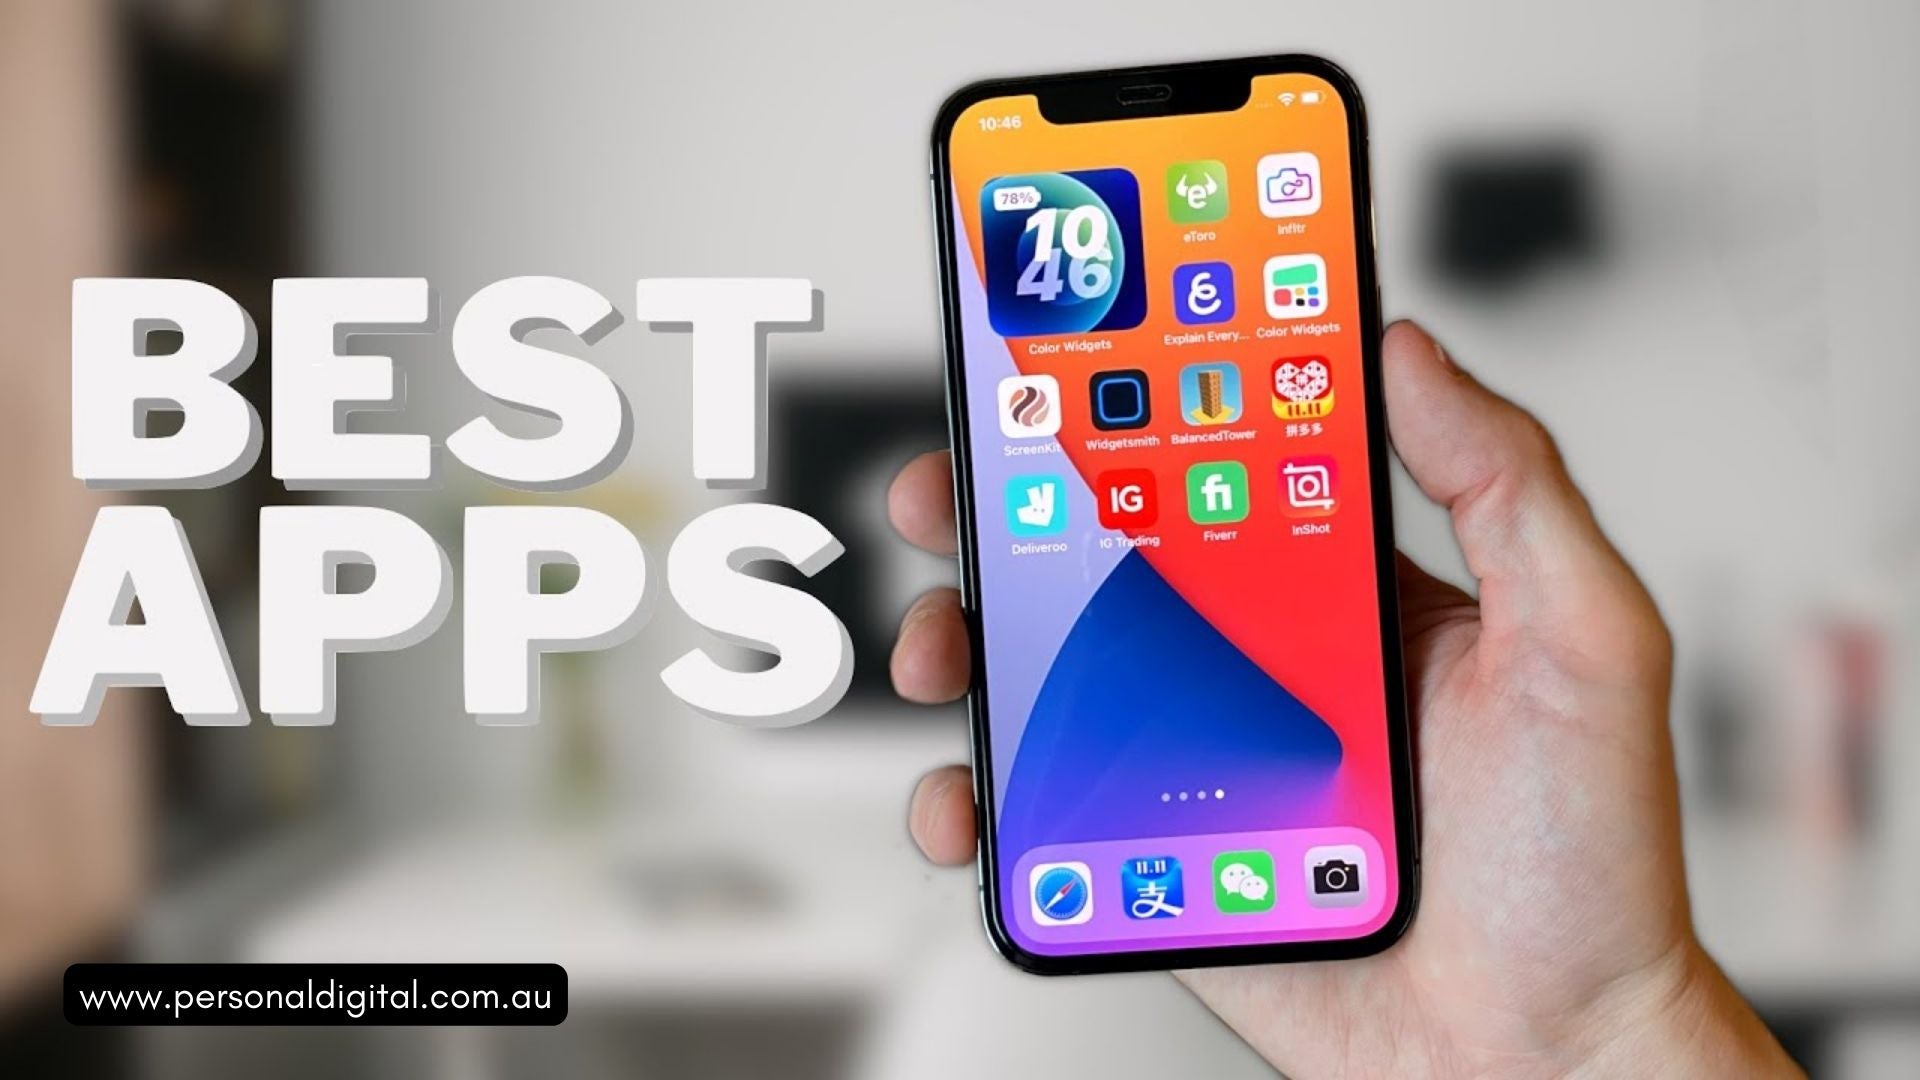 Start with the best apps